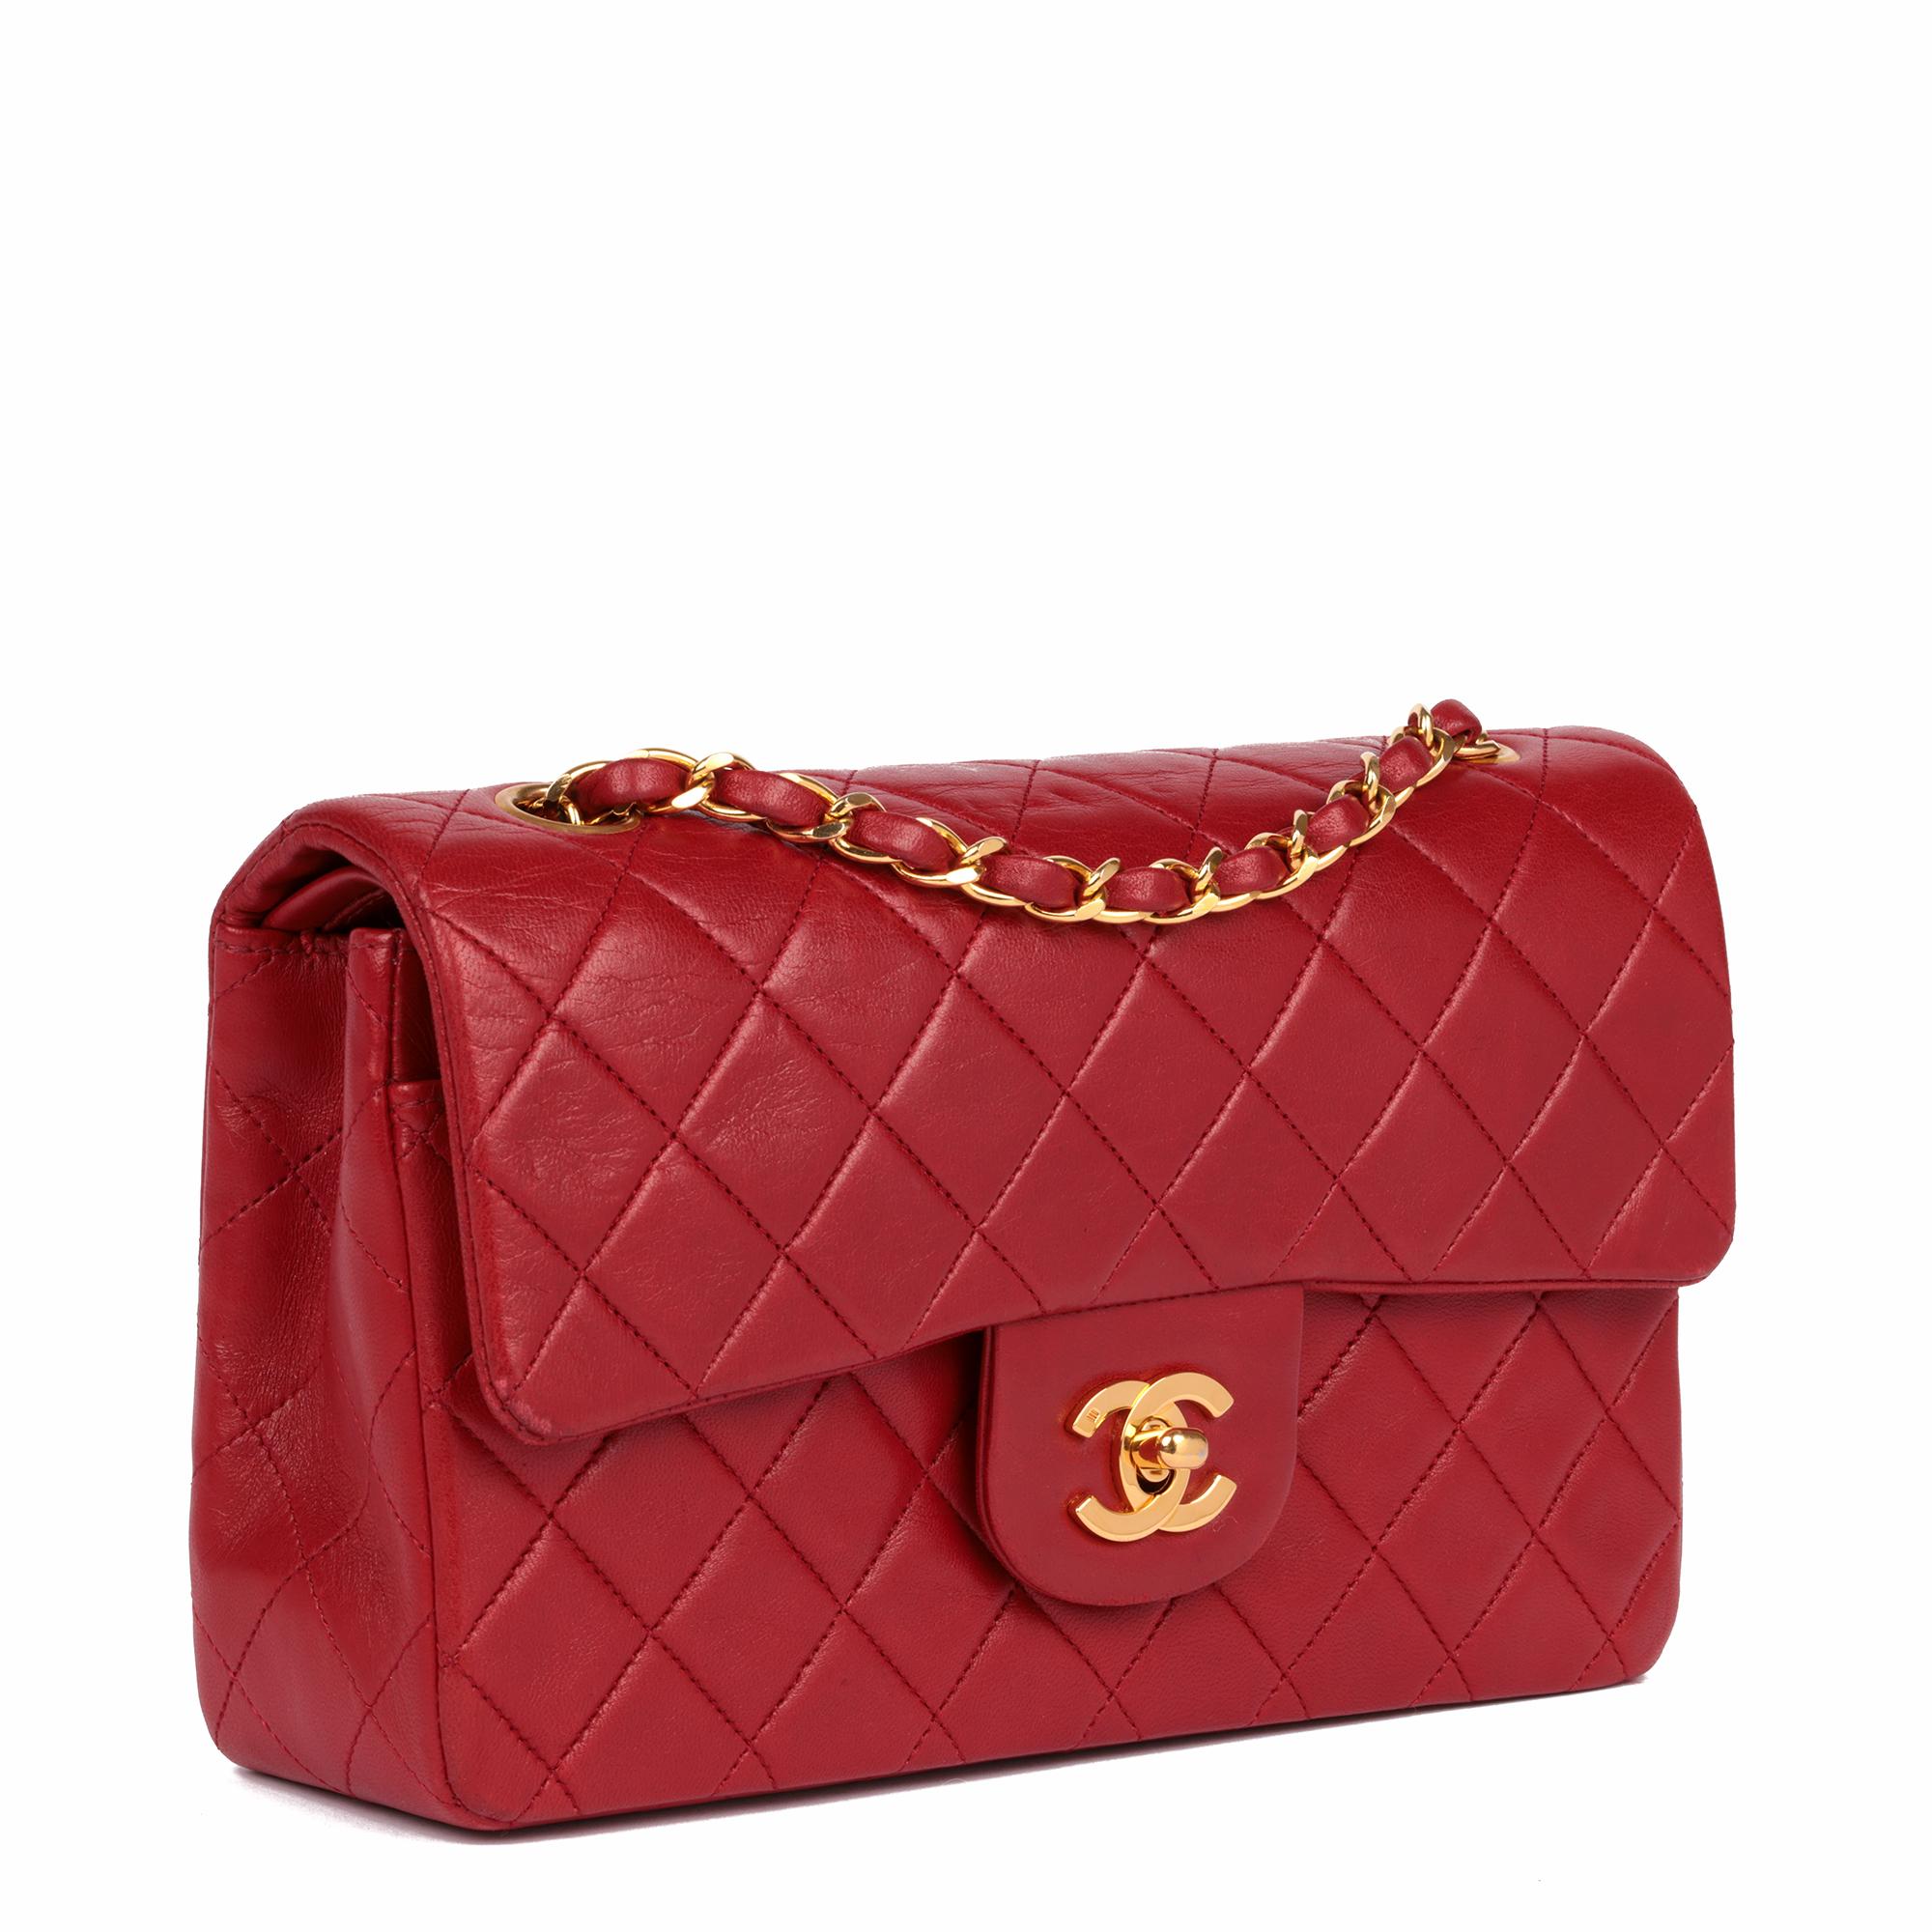 CHANEL
Red Quilted Lambskin Vintage Small Classic Double Flap Bag

Xupes Reference: HB5055
Serial Number: 1522212
Age (Circa): 1990
Accompanied By: Chanel Dust Bag, Authenticity Card
Authenticity Details: Authenticity Card, Serial Sticker (Made in